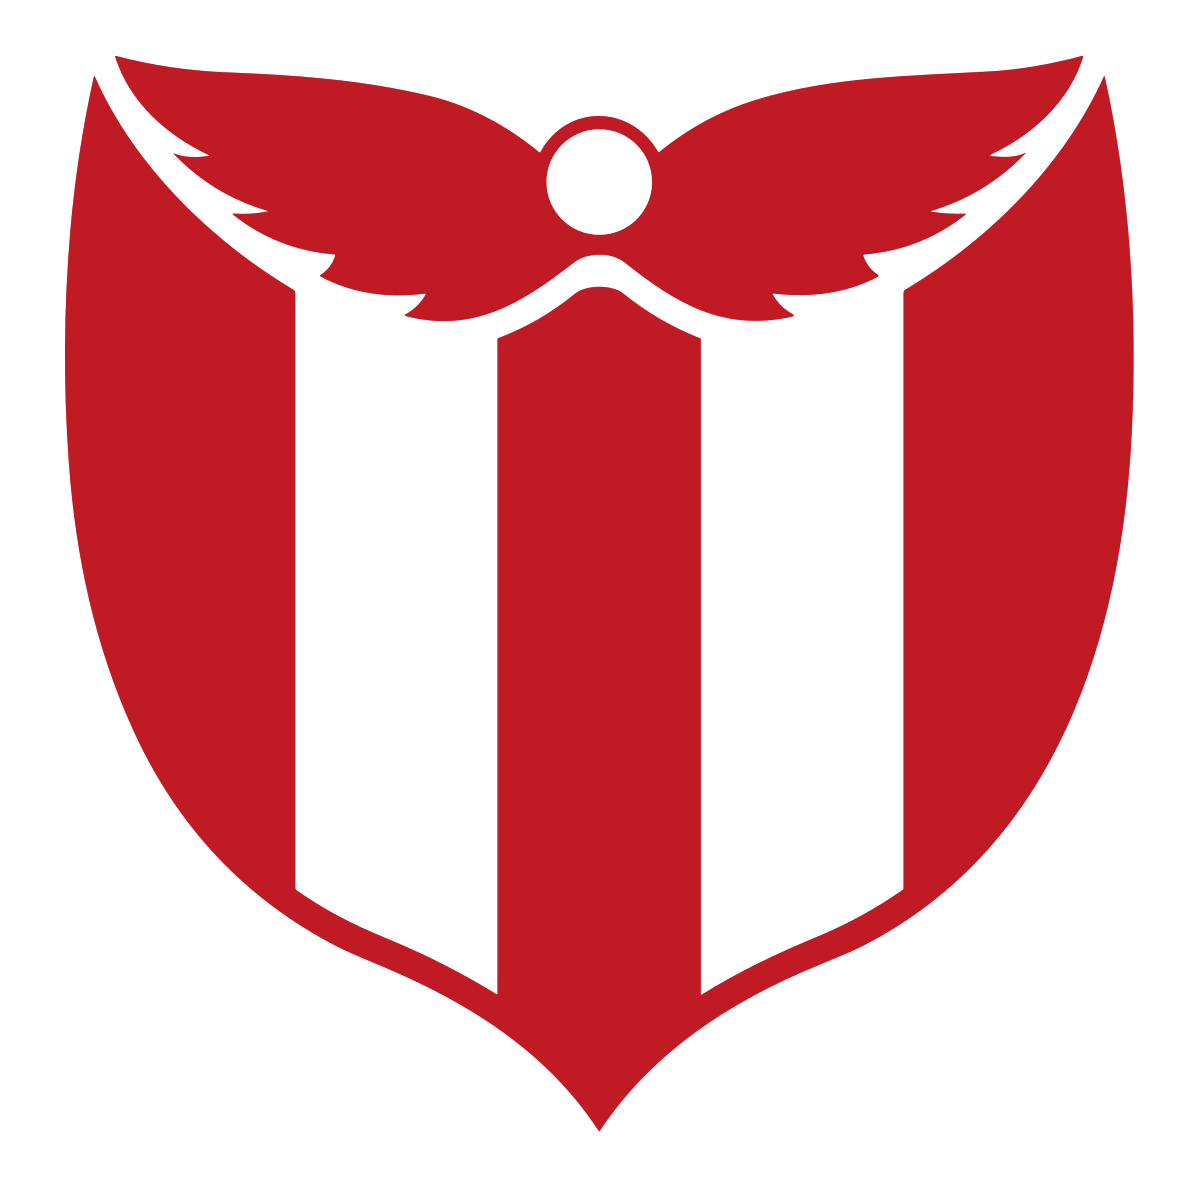 Club Atlético River Plate (Montevideo) - Wikipedia